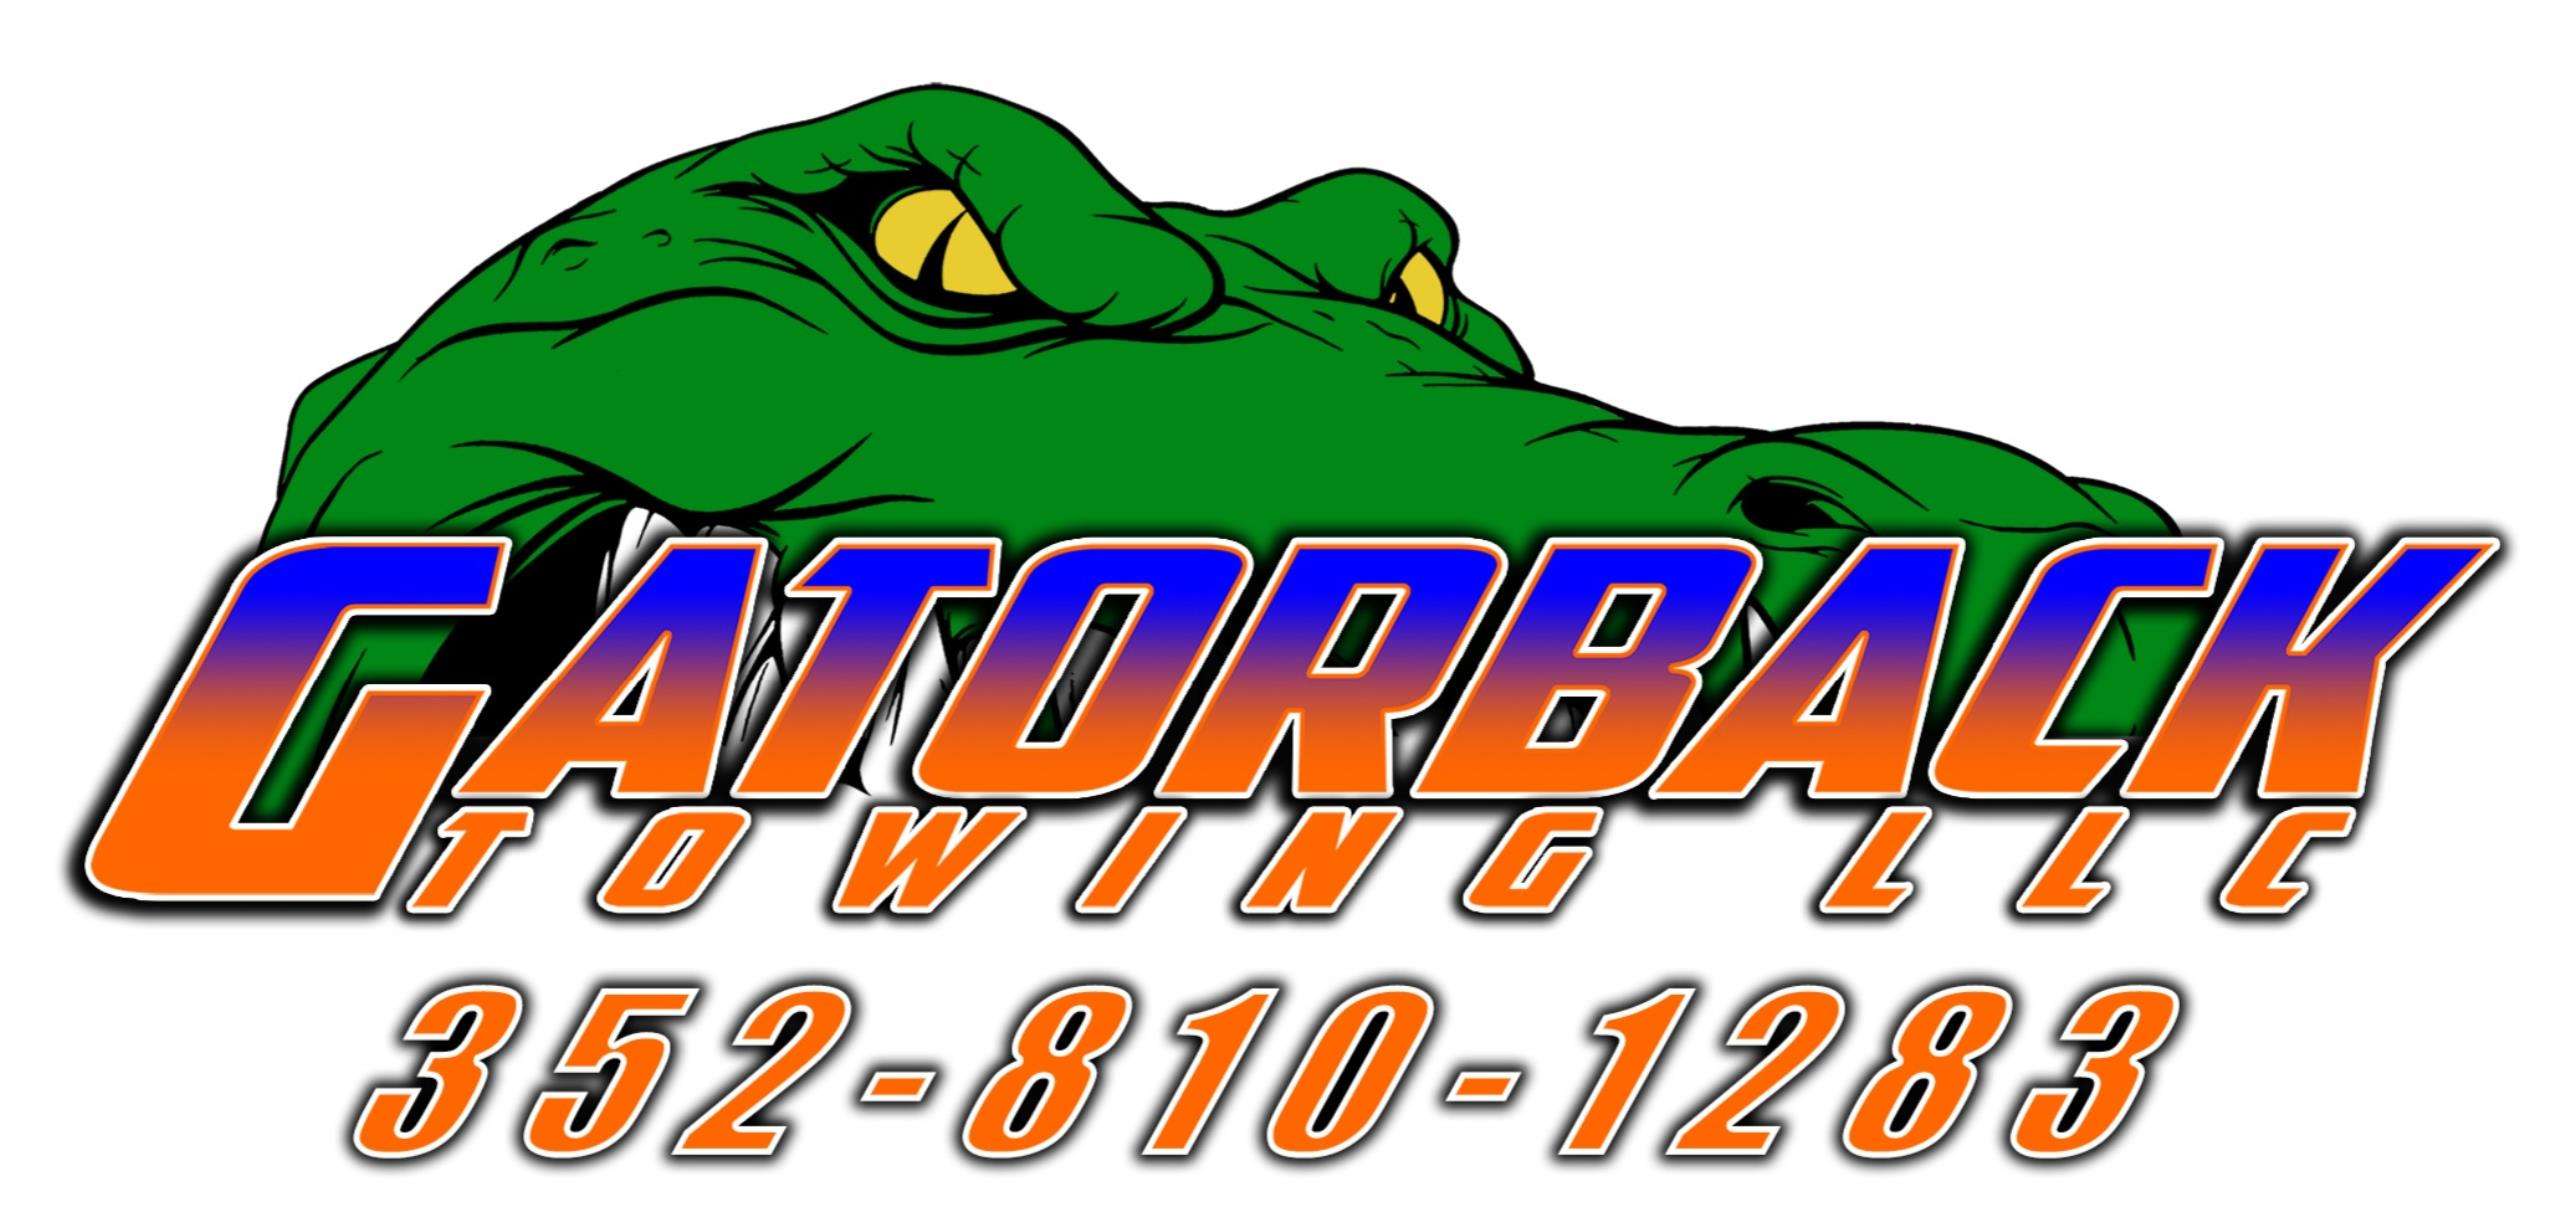 Gatorback Towing and Recovery LLC Logo